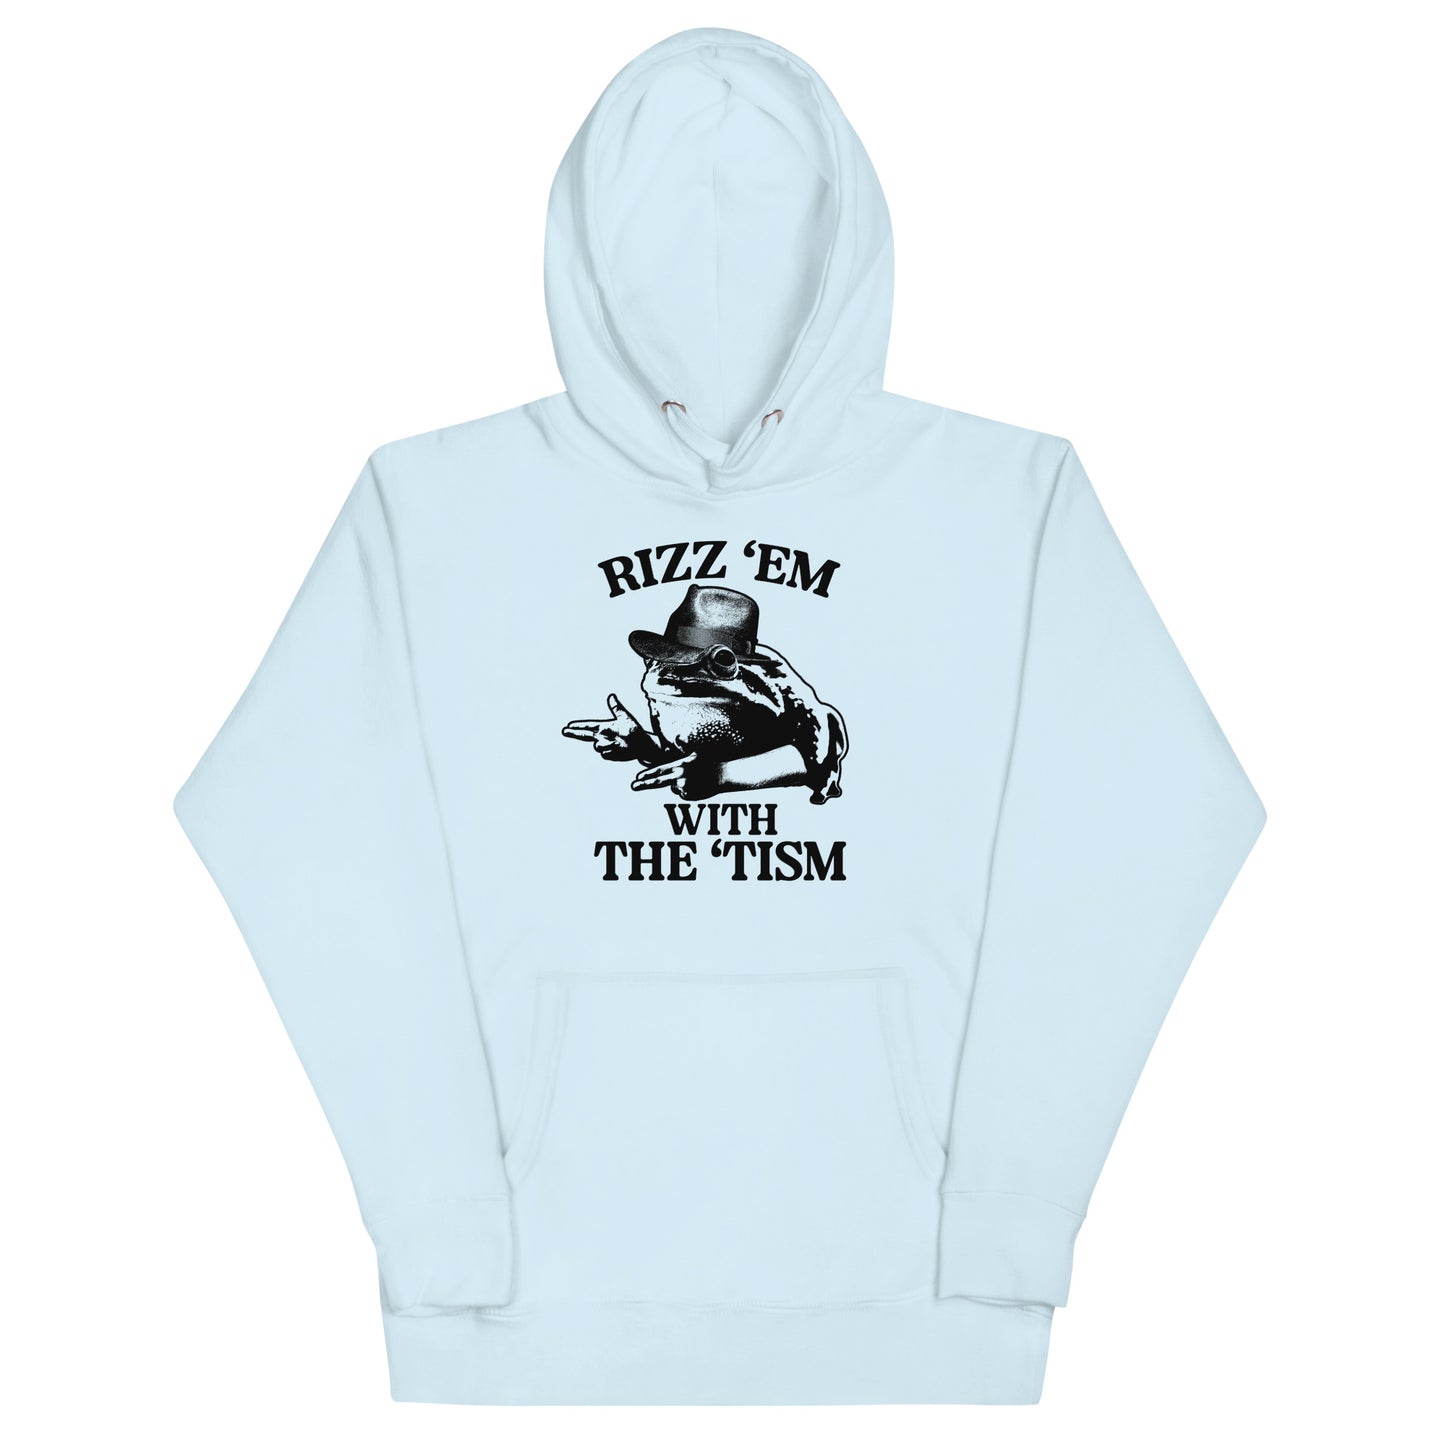 Rizz 'Em With the 'Tism (Frog) Unisex Hoodie